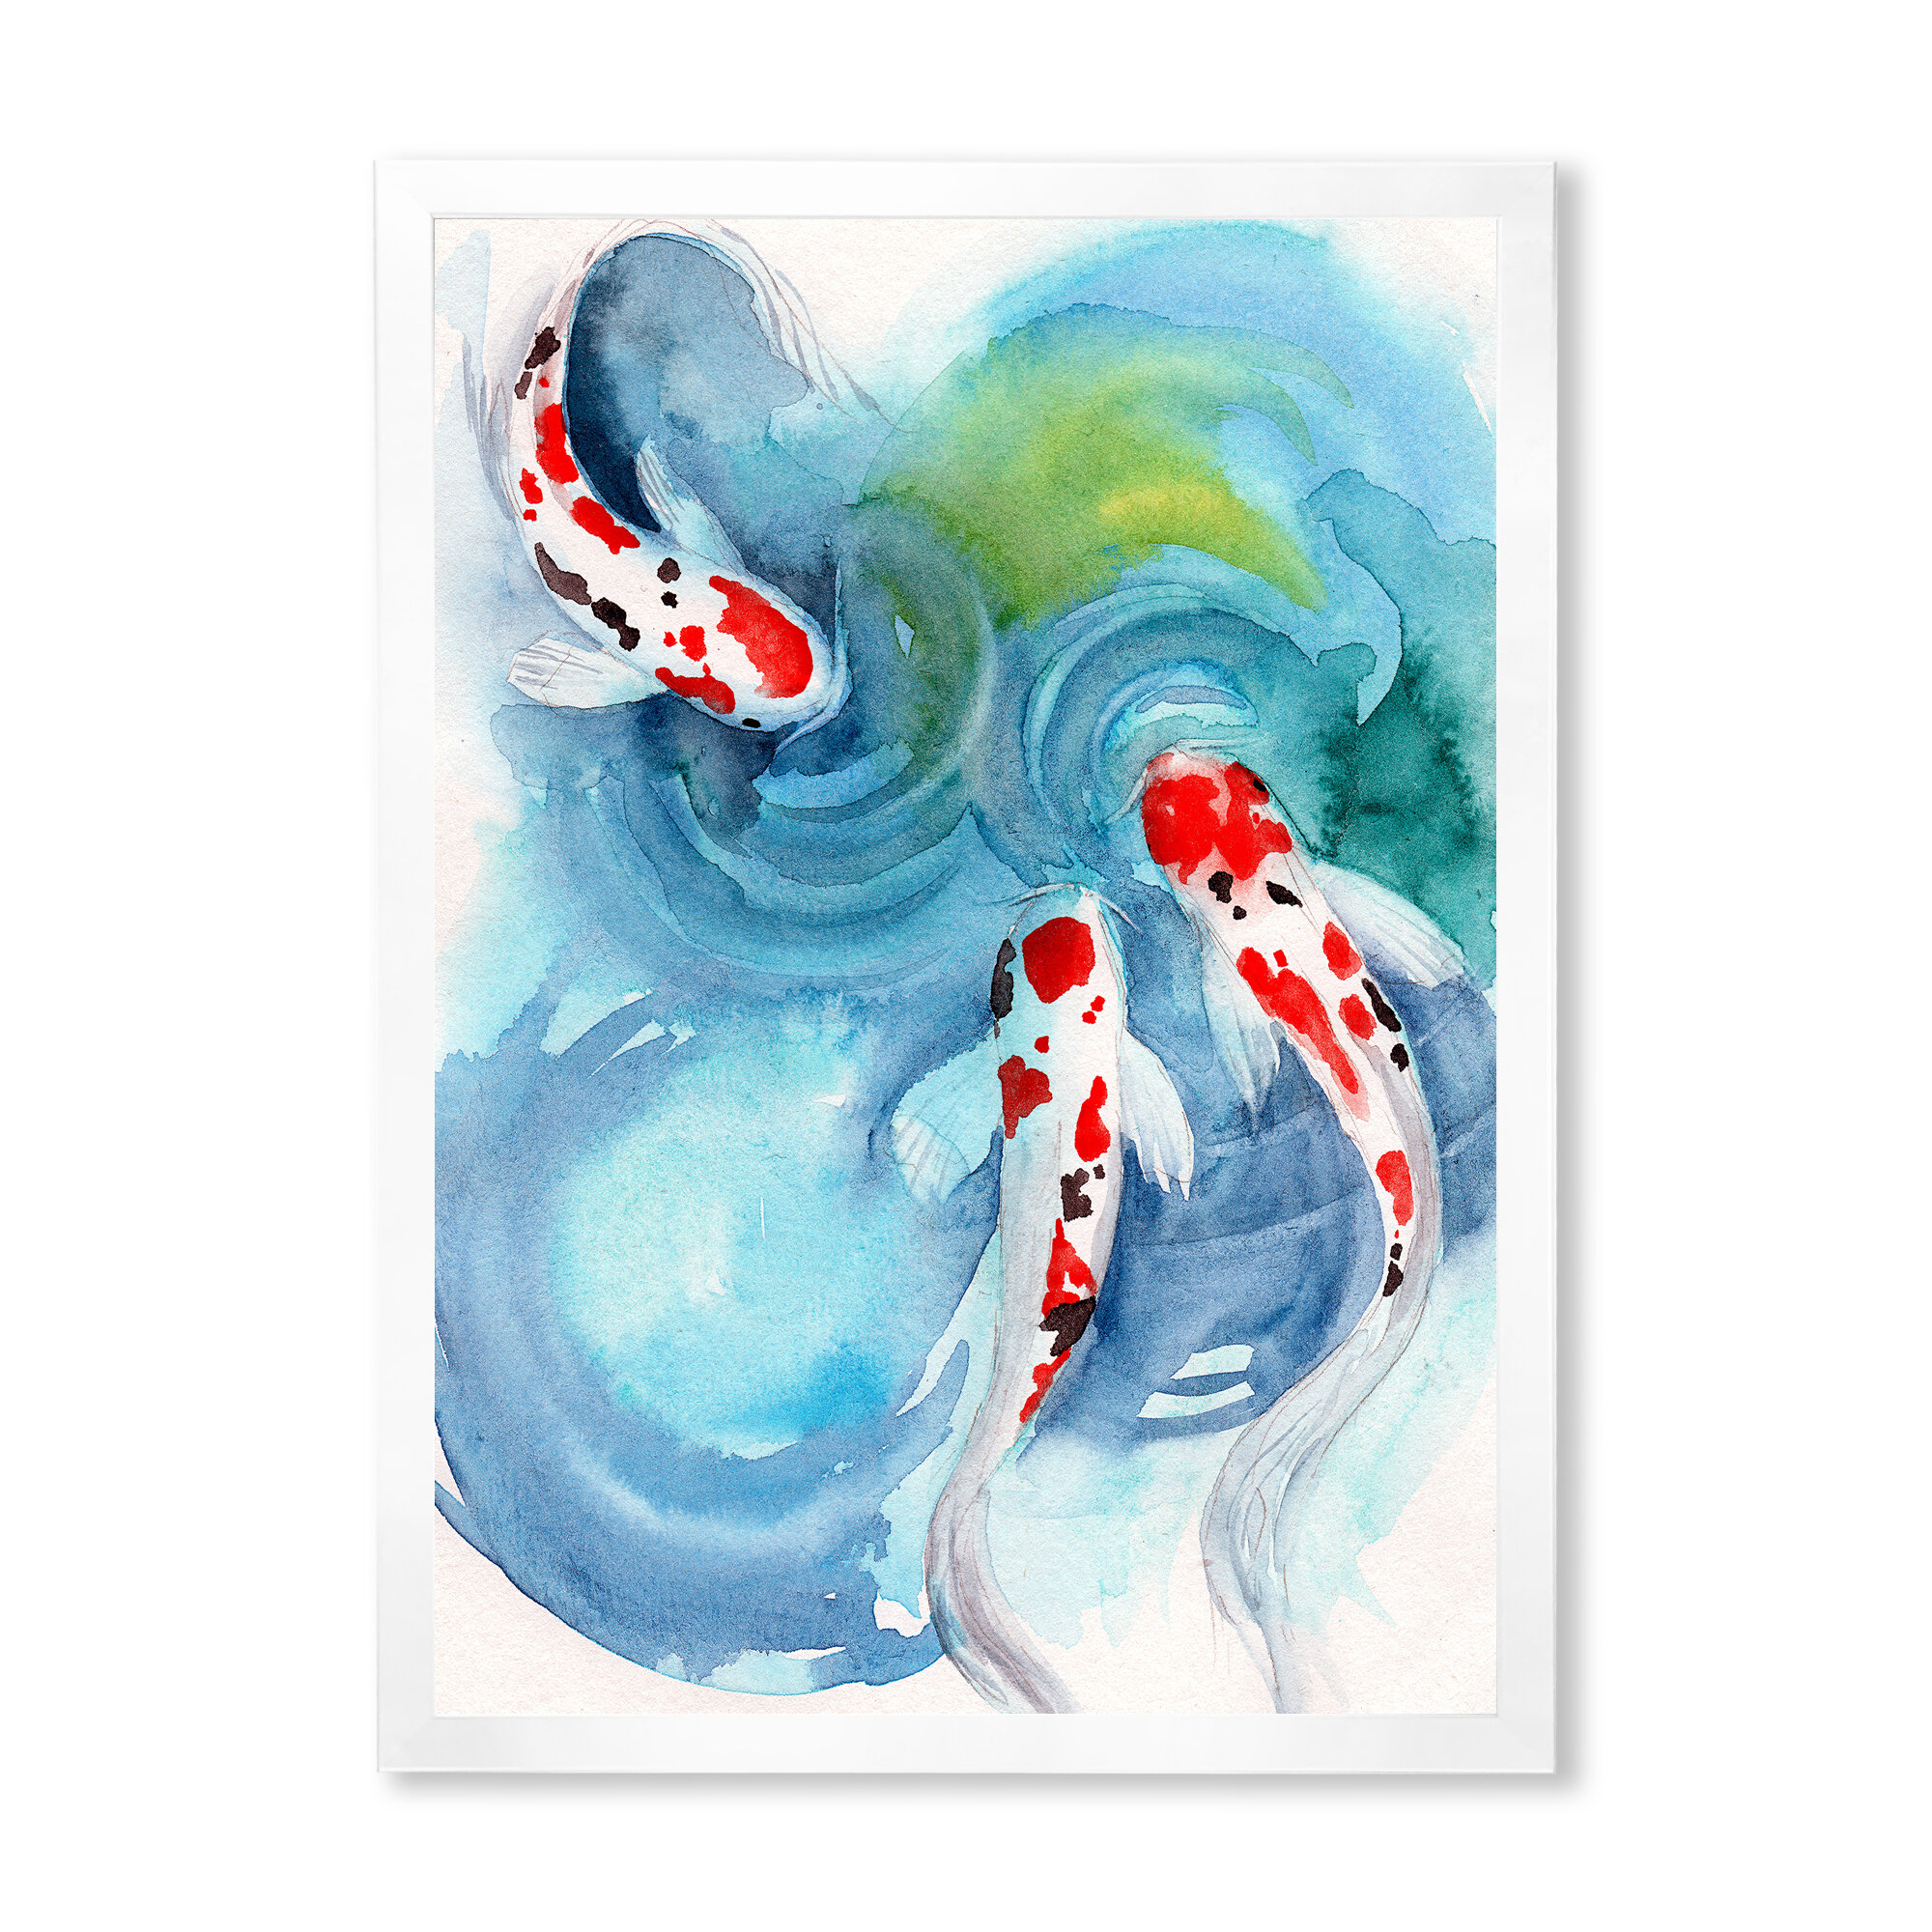 White Koi Carp Fish In a Pond Wall Art. Watercolor painting 11,5 x 16,25